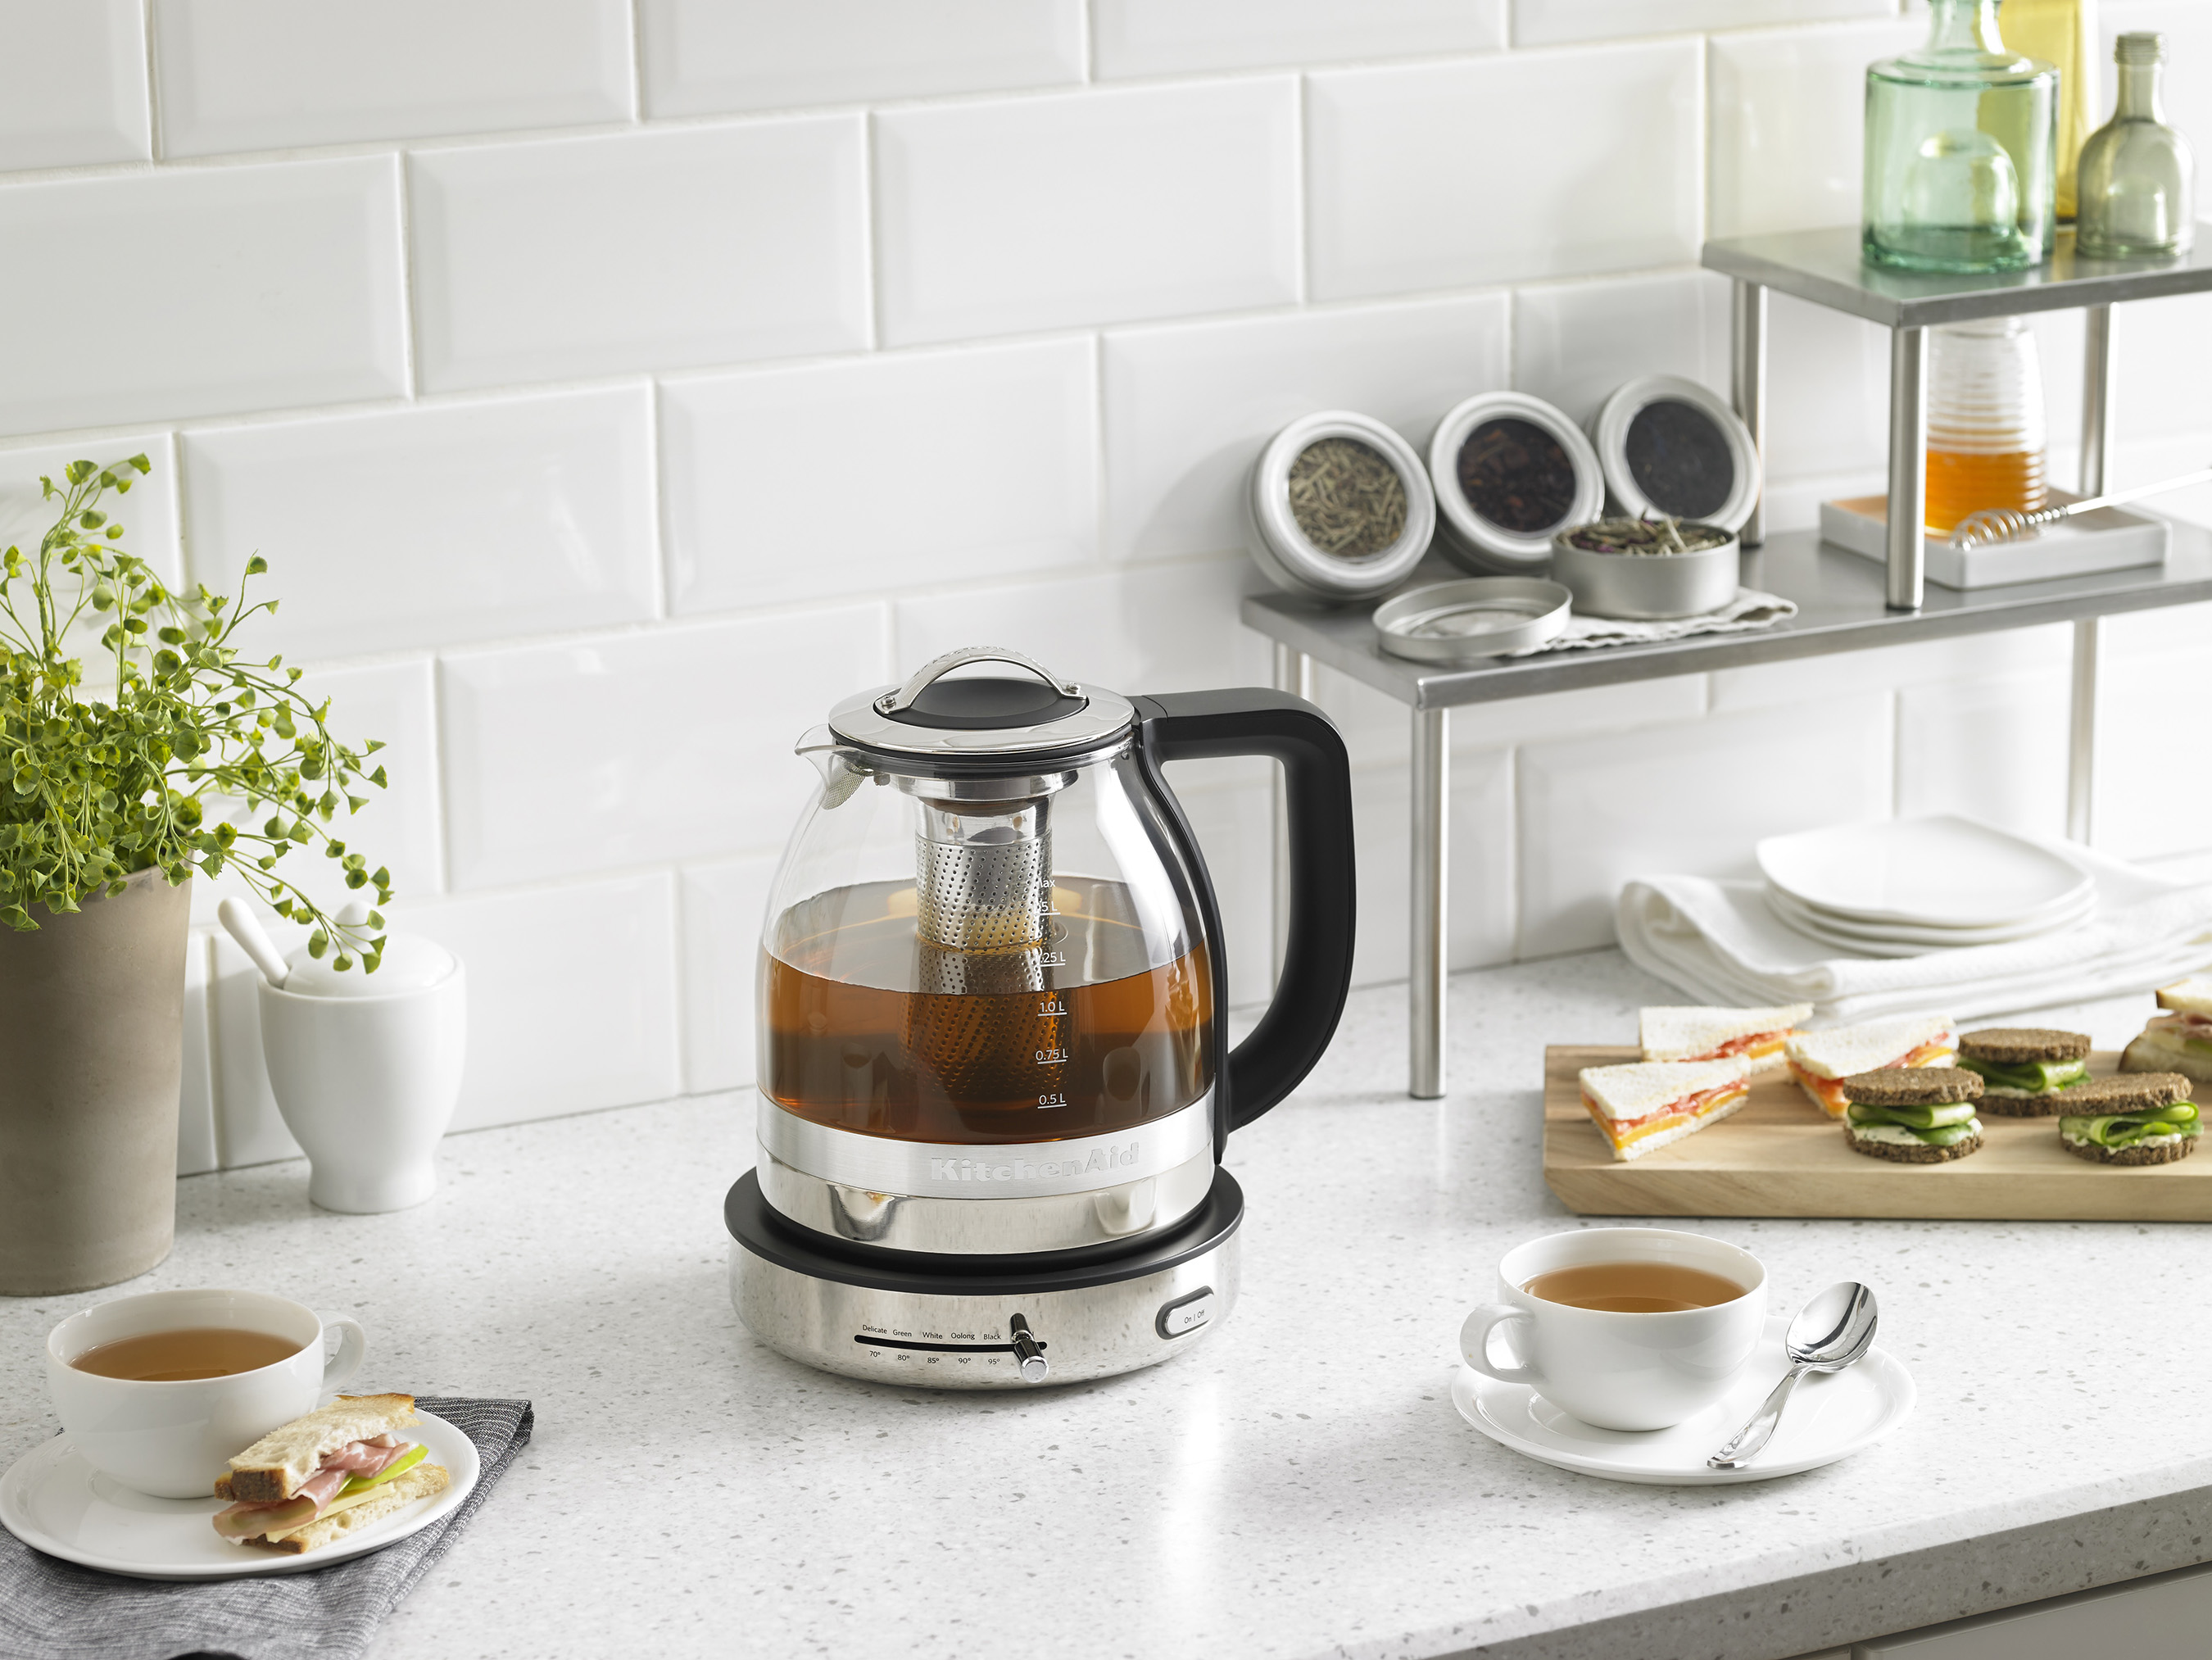 The new KitchenAid® Glass Tea Kettle with preset settings offers tea lovers easy mastery of the perfect cup.